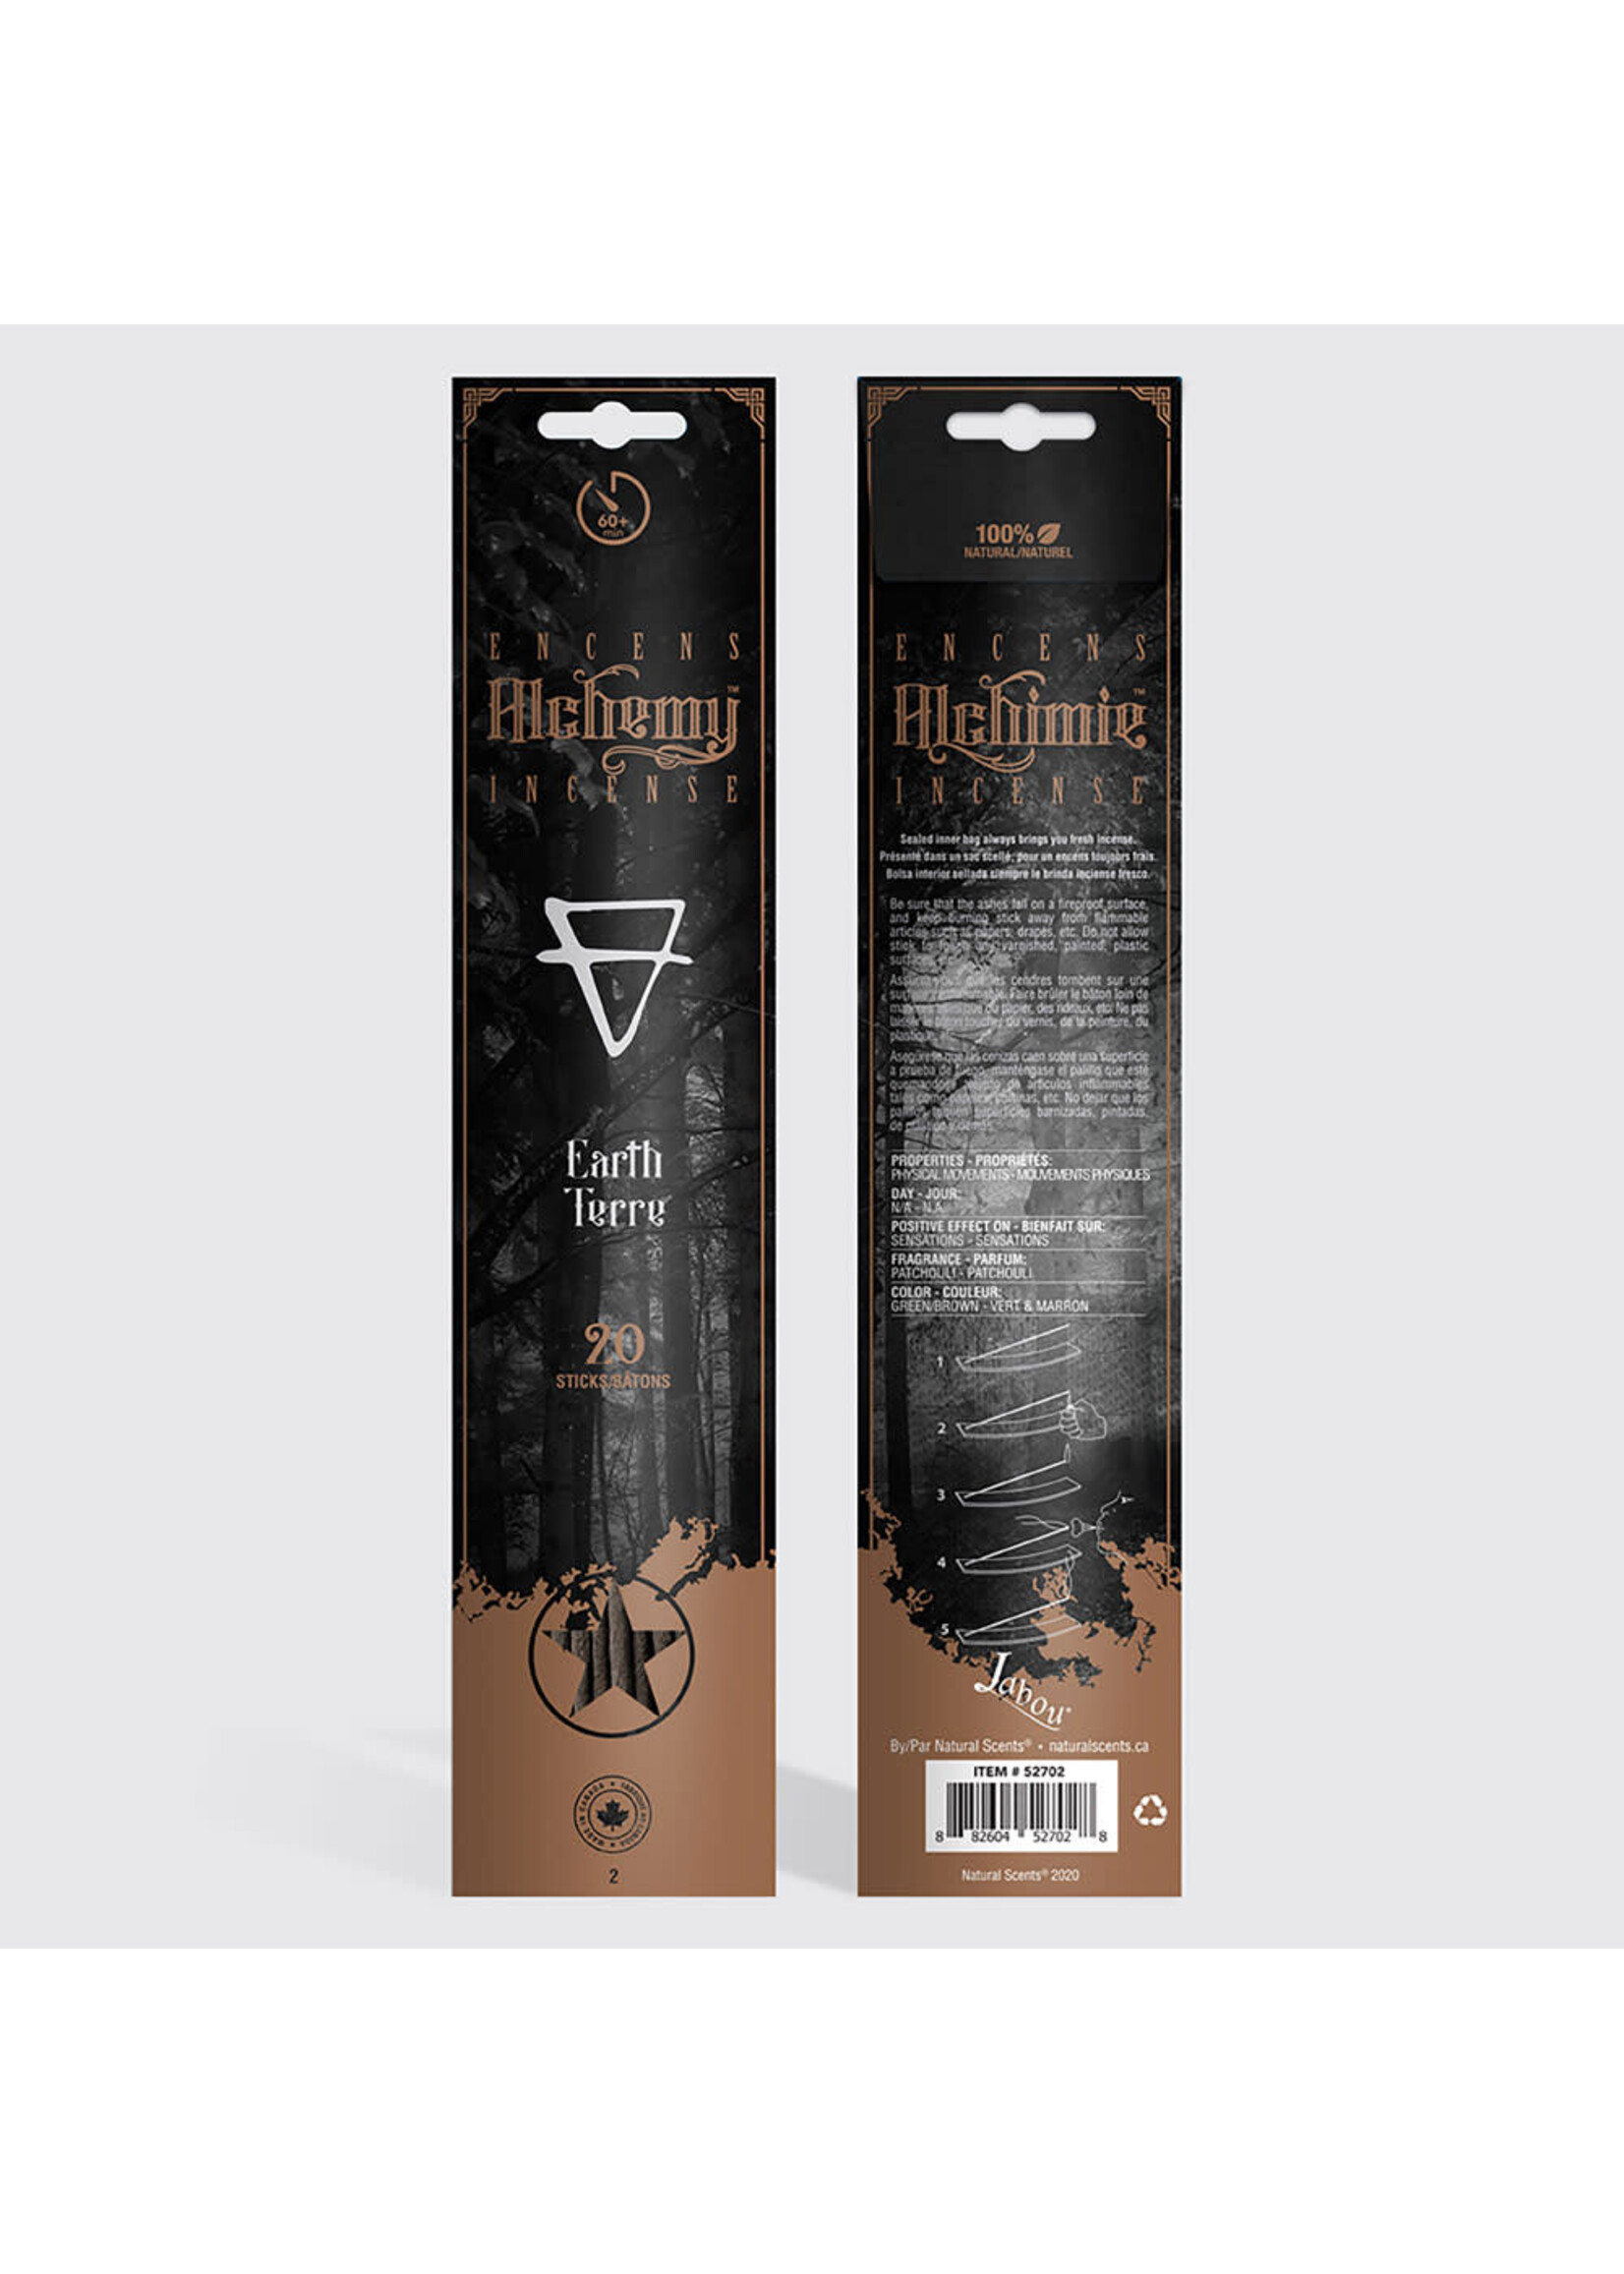 Alchemy Incense Air